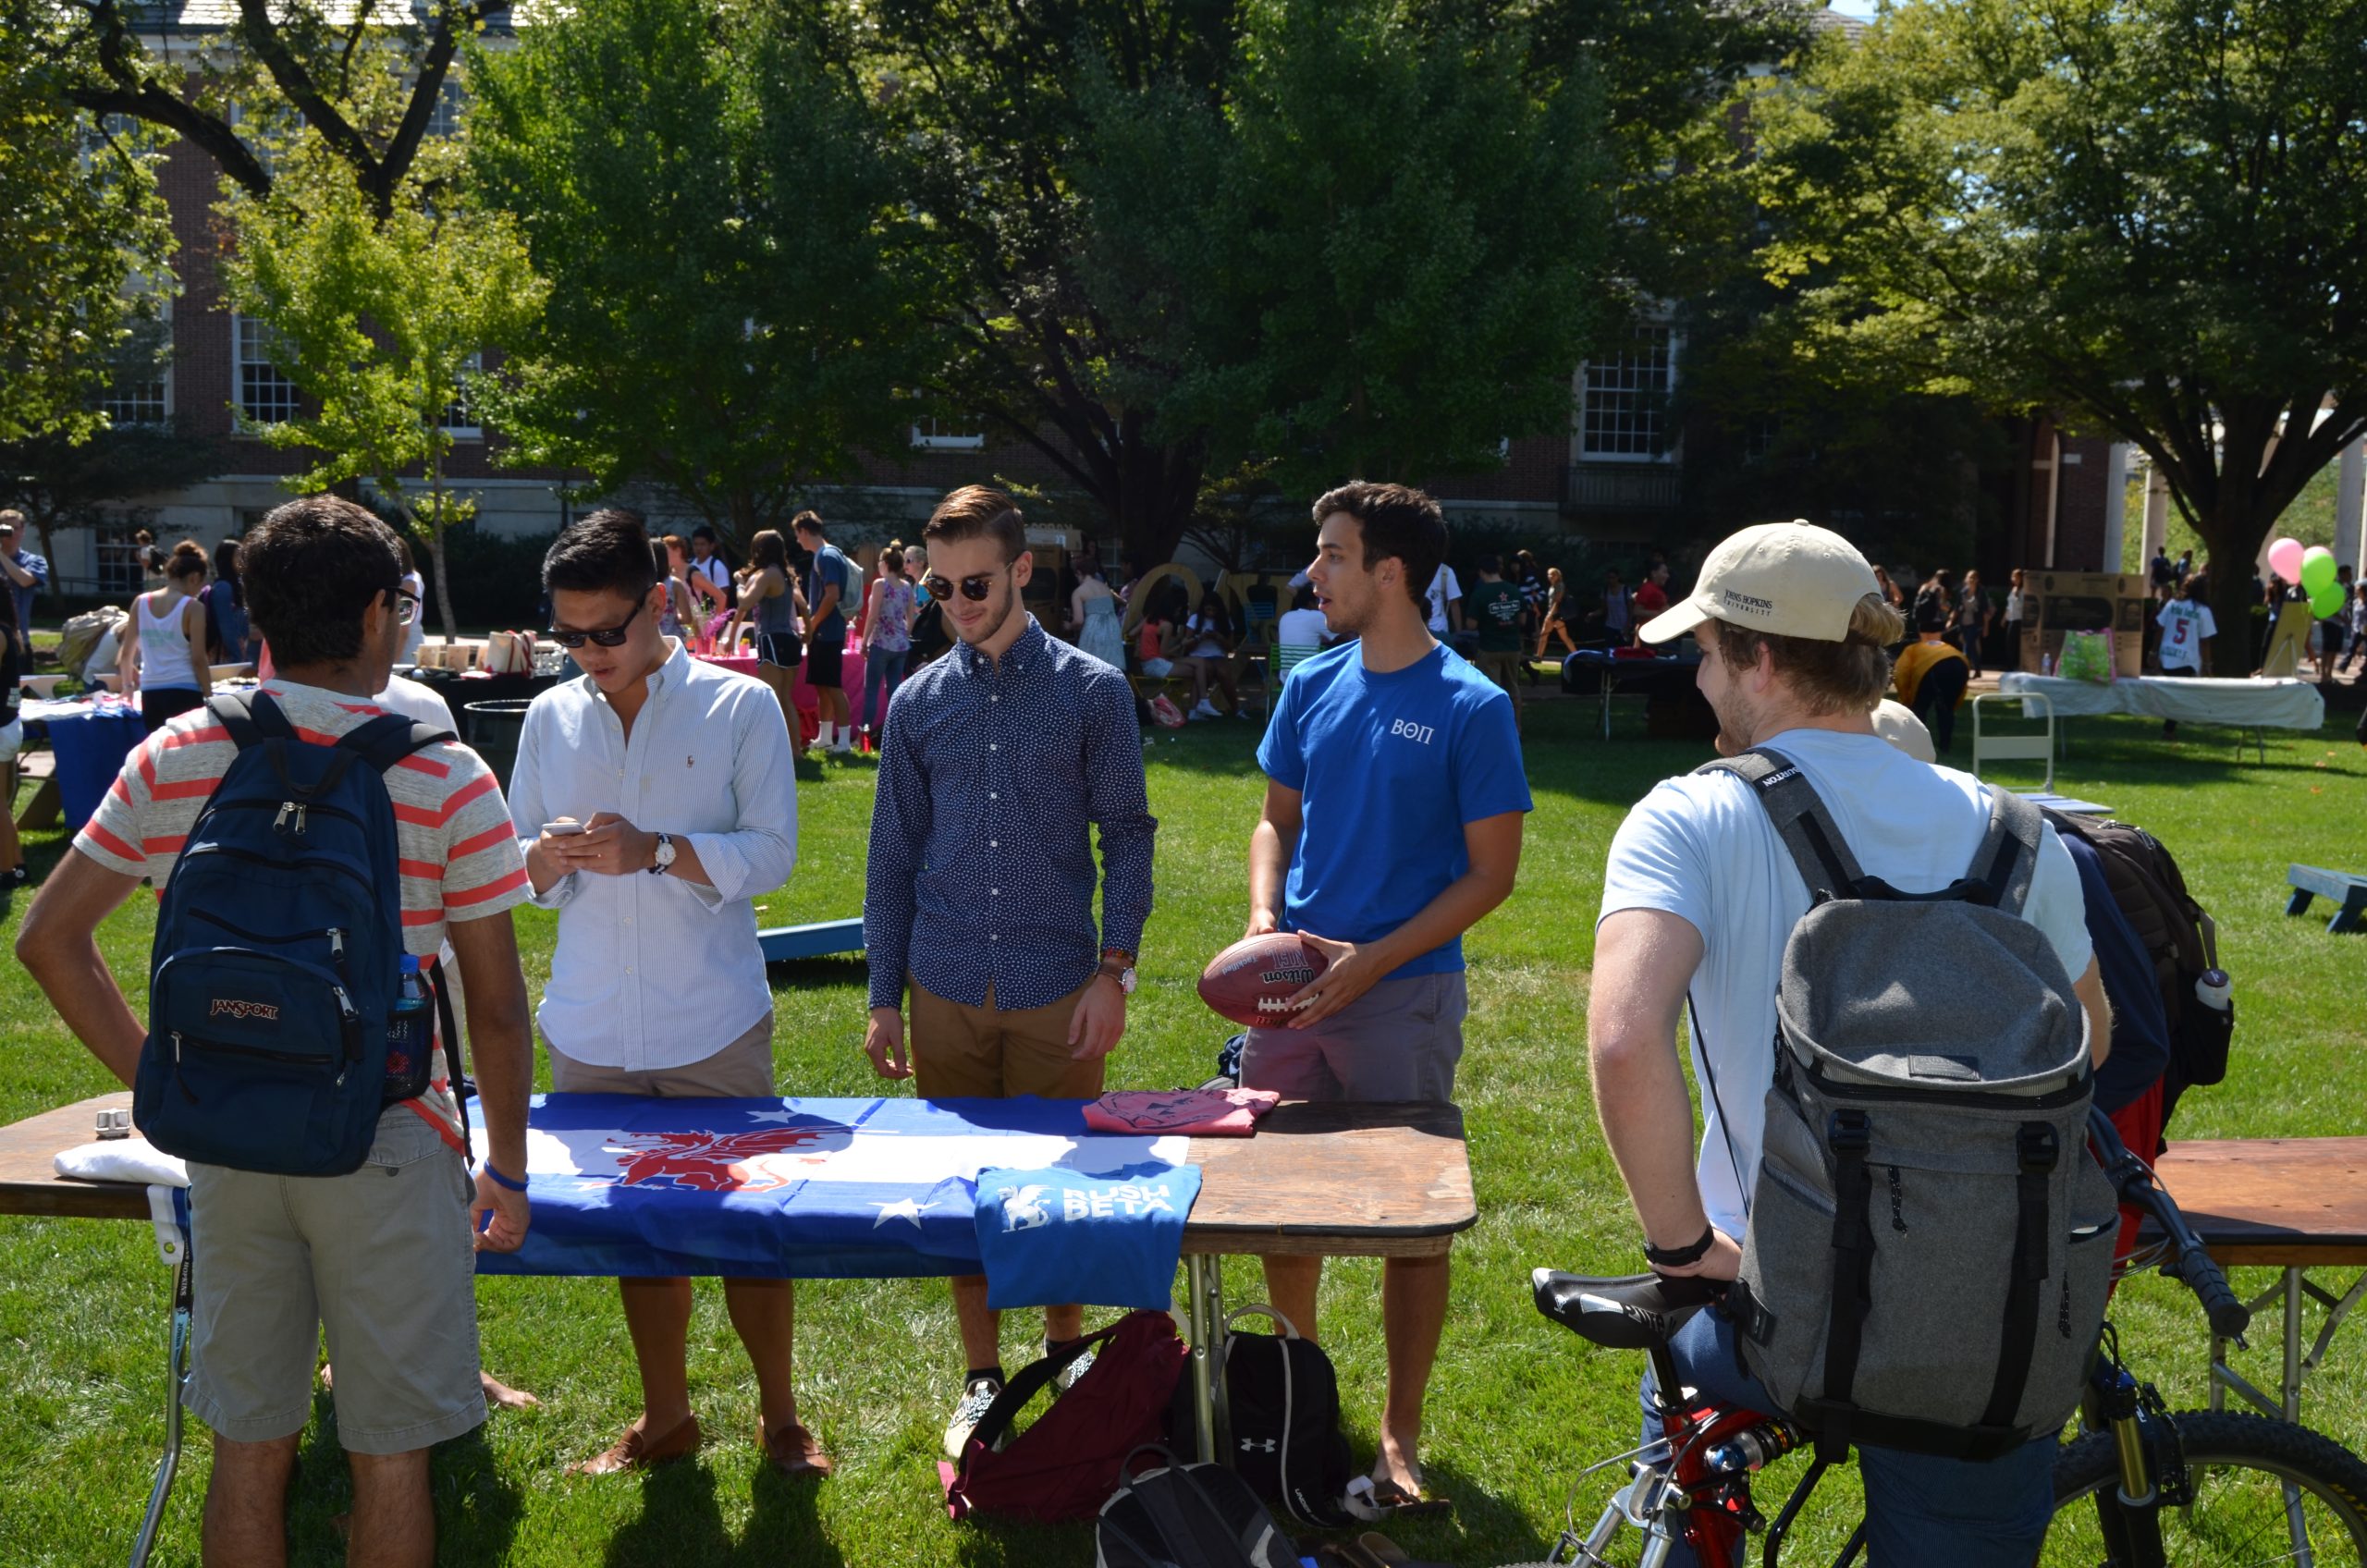 Brothers attending a fraternity recruitment event